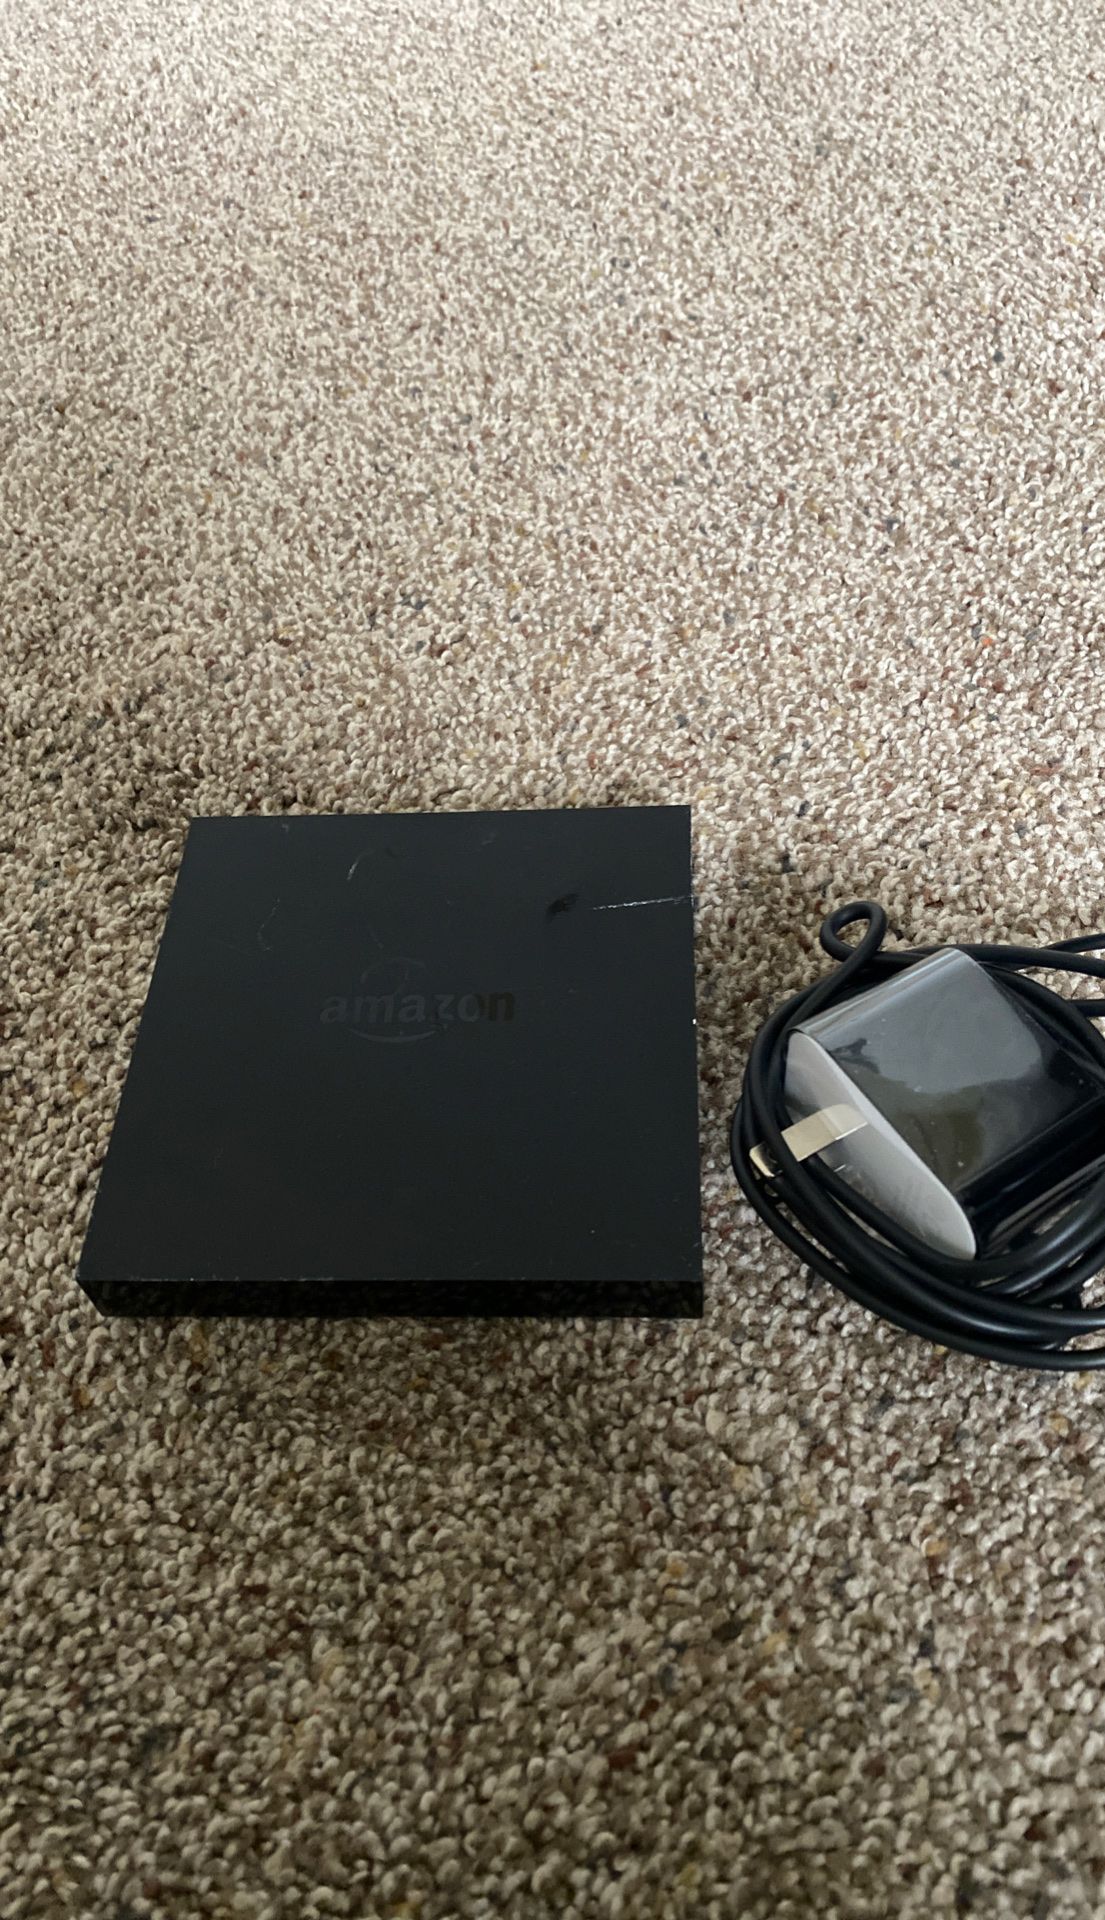 Amazon FireTV second generation with AC adapter and remote.